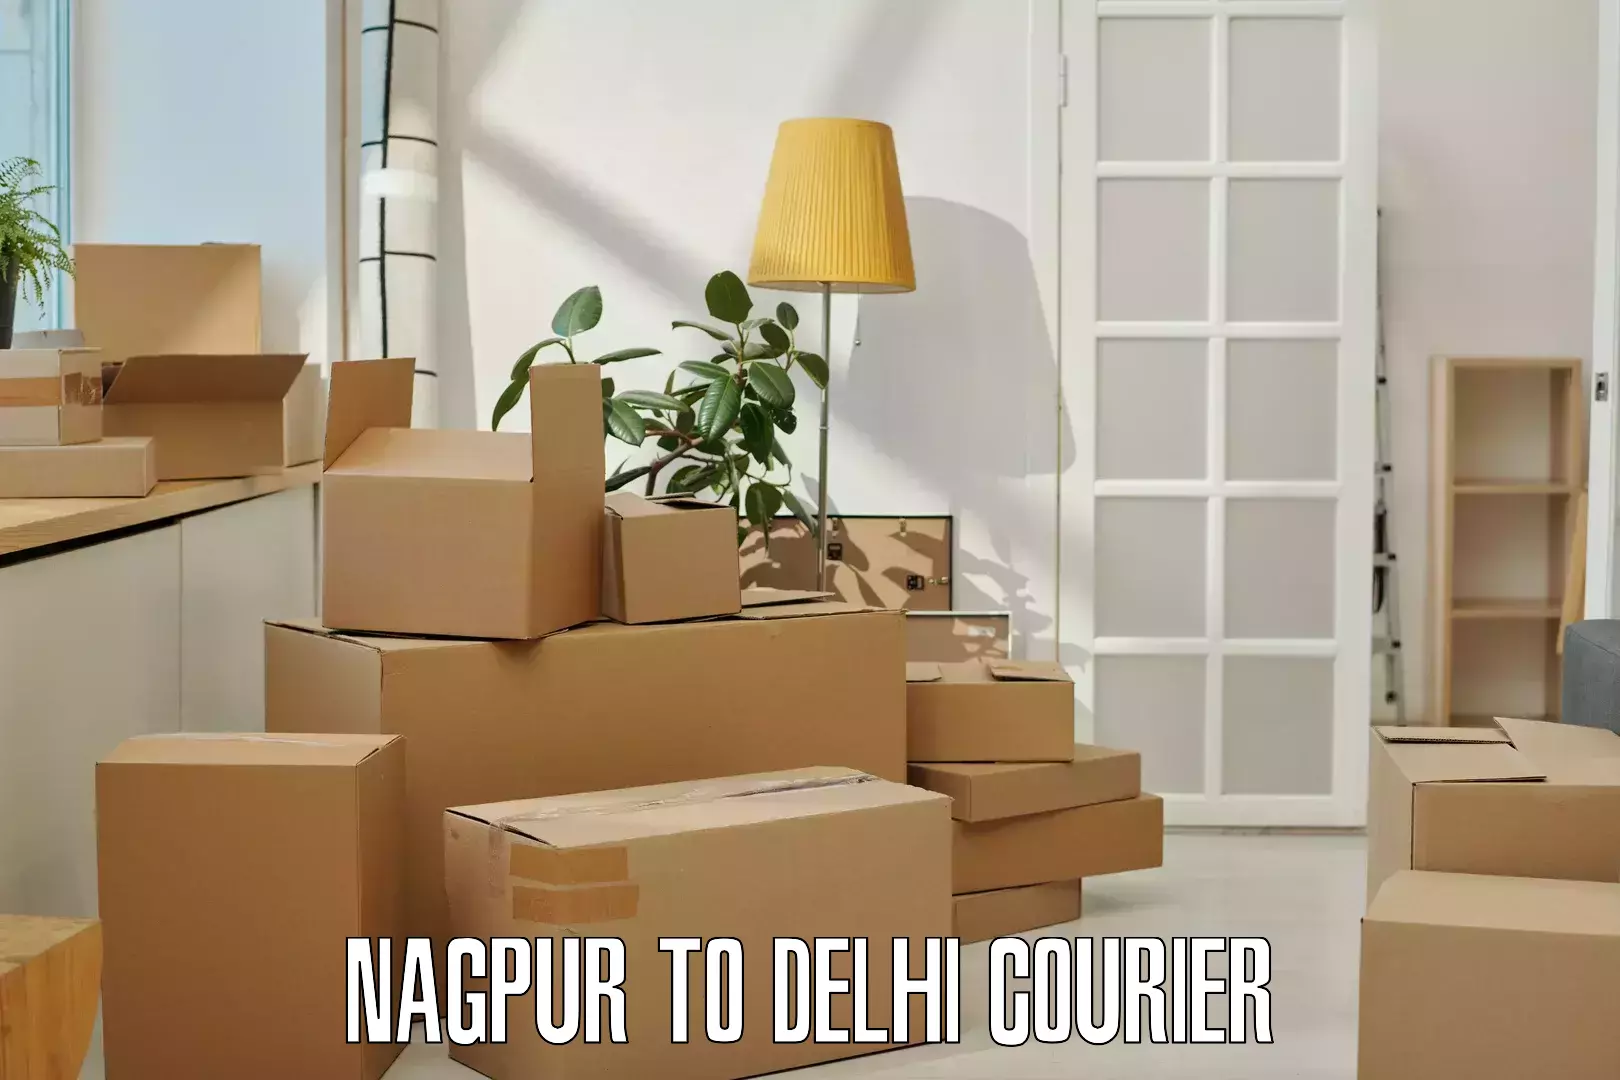 Express package services Nagpur to University of Delhi